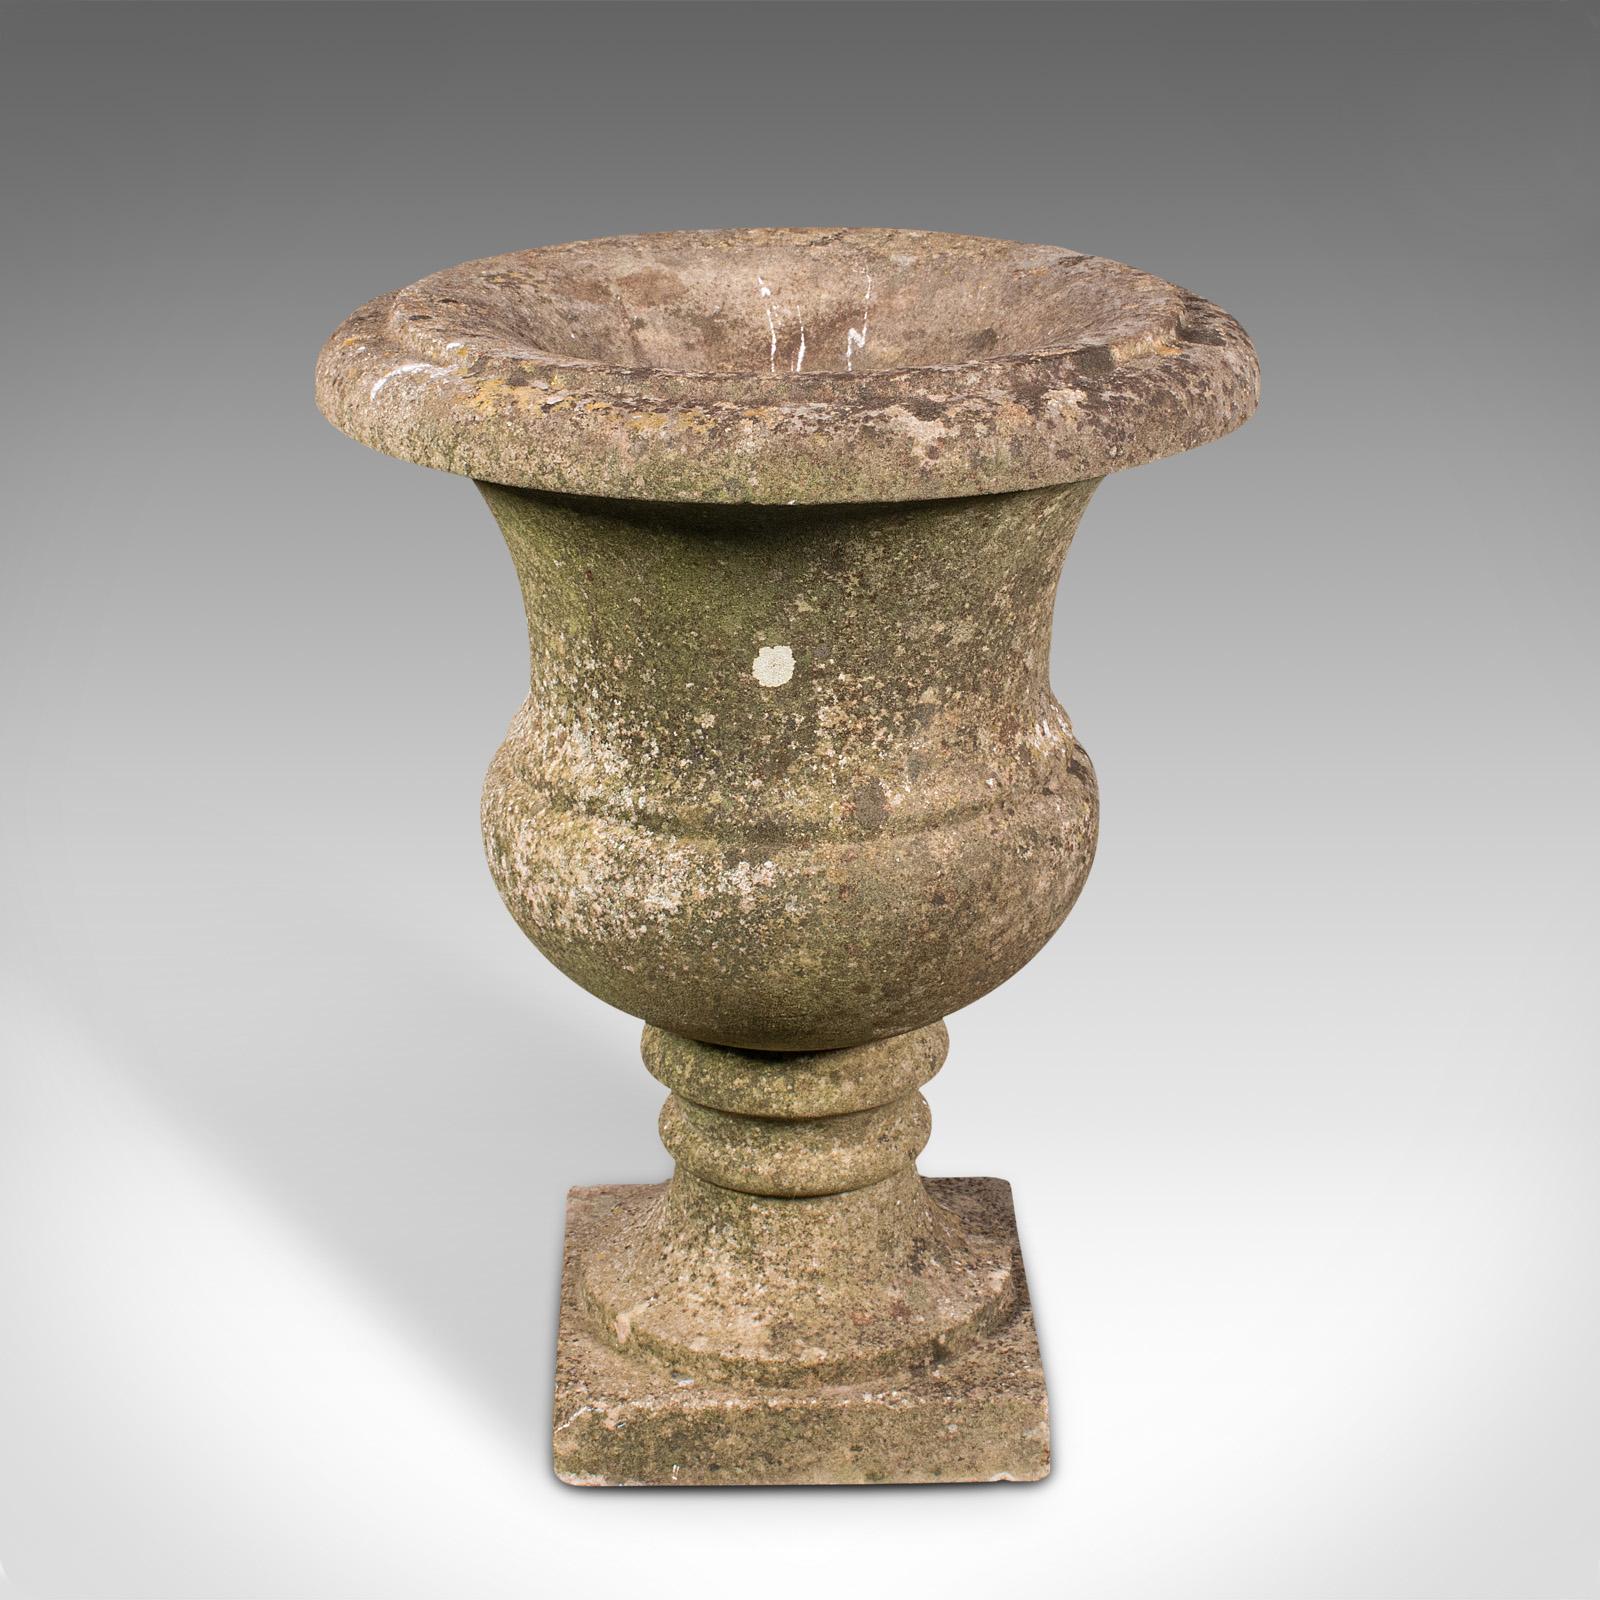 Antique Weathered Planting Urn, English Marble, Decorative Jardiniere, Victorian In Good Condition For Sale In Hele, Devon, GB